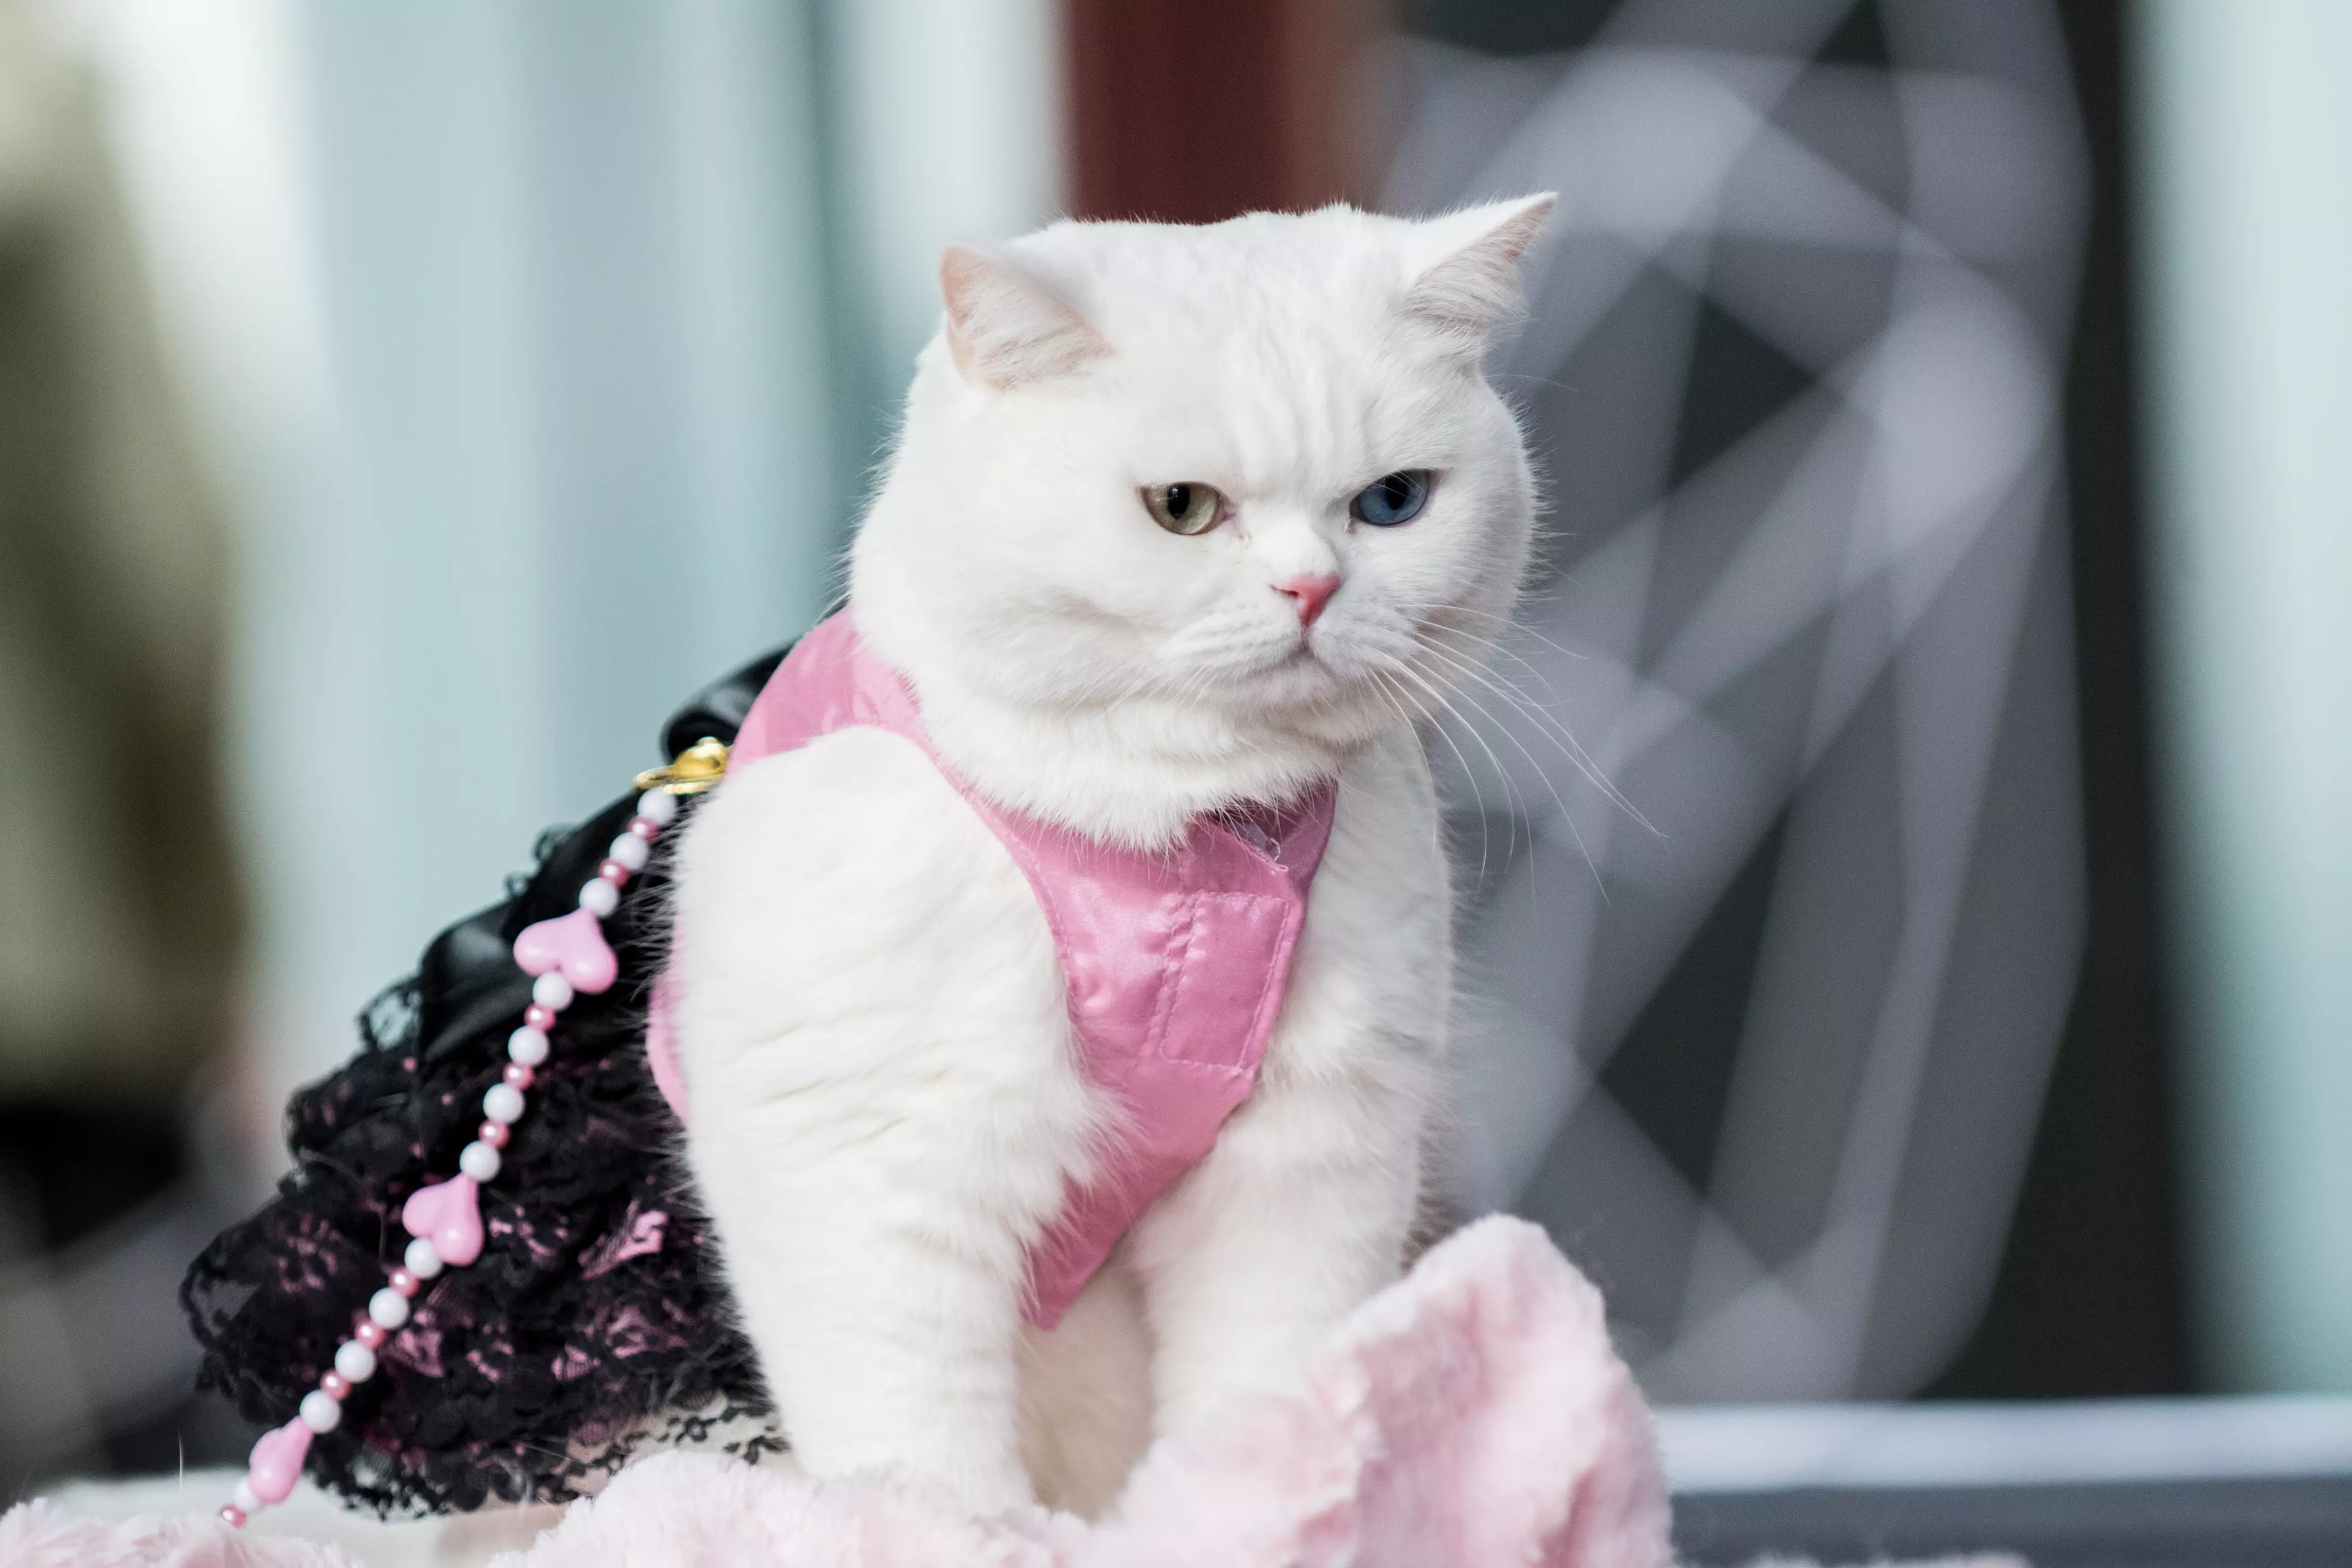 The LondonCats Cat Extravaganza returns for it's second year in January. (